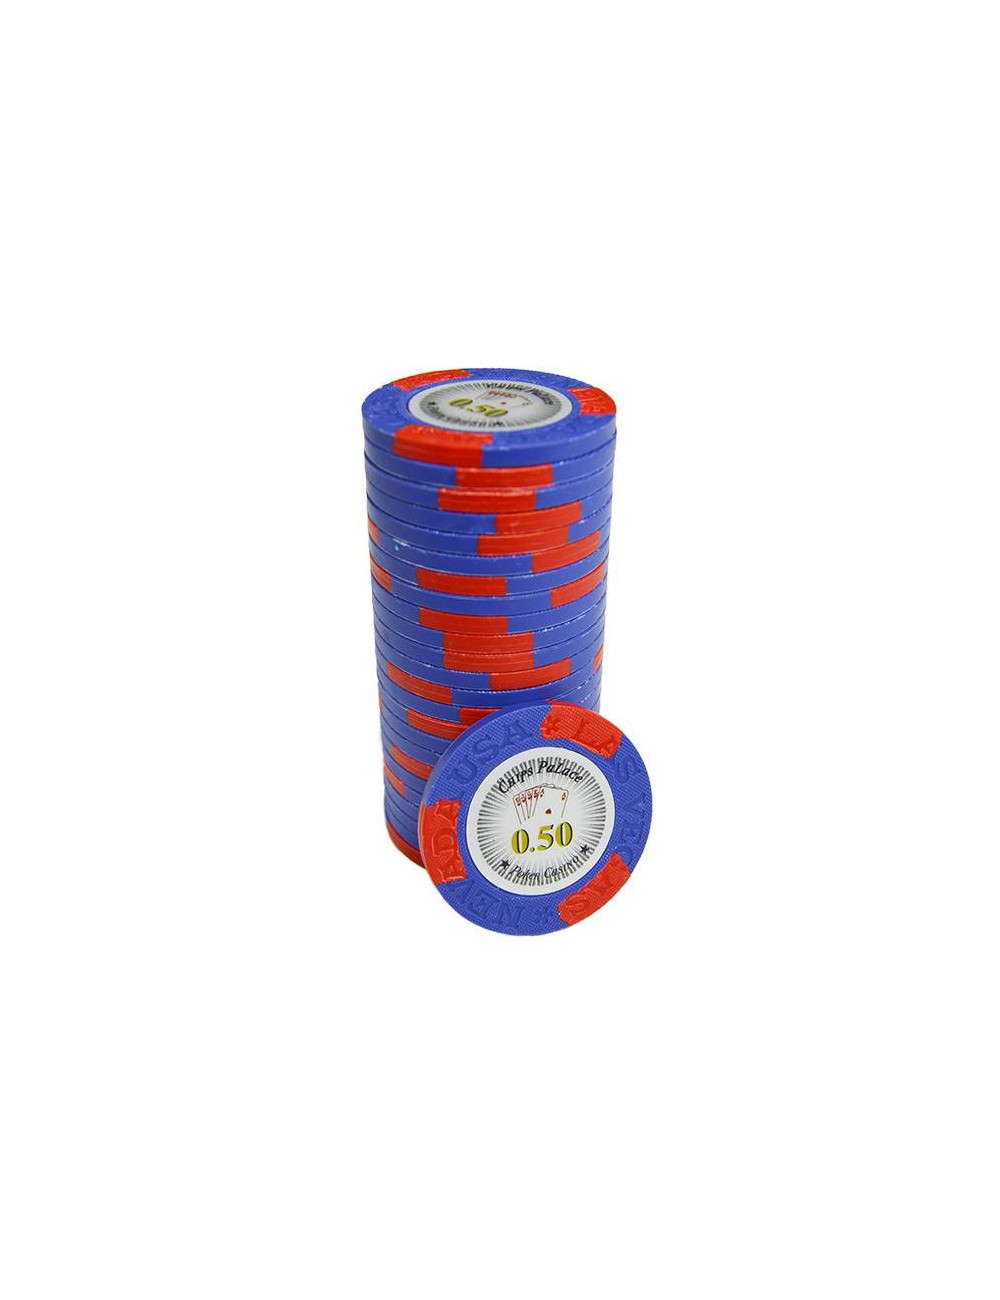 Poker chip "LAS VEGAS 0.50" - made of clay composite with metal insert - 14g - sold individually